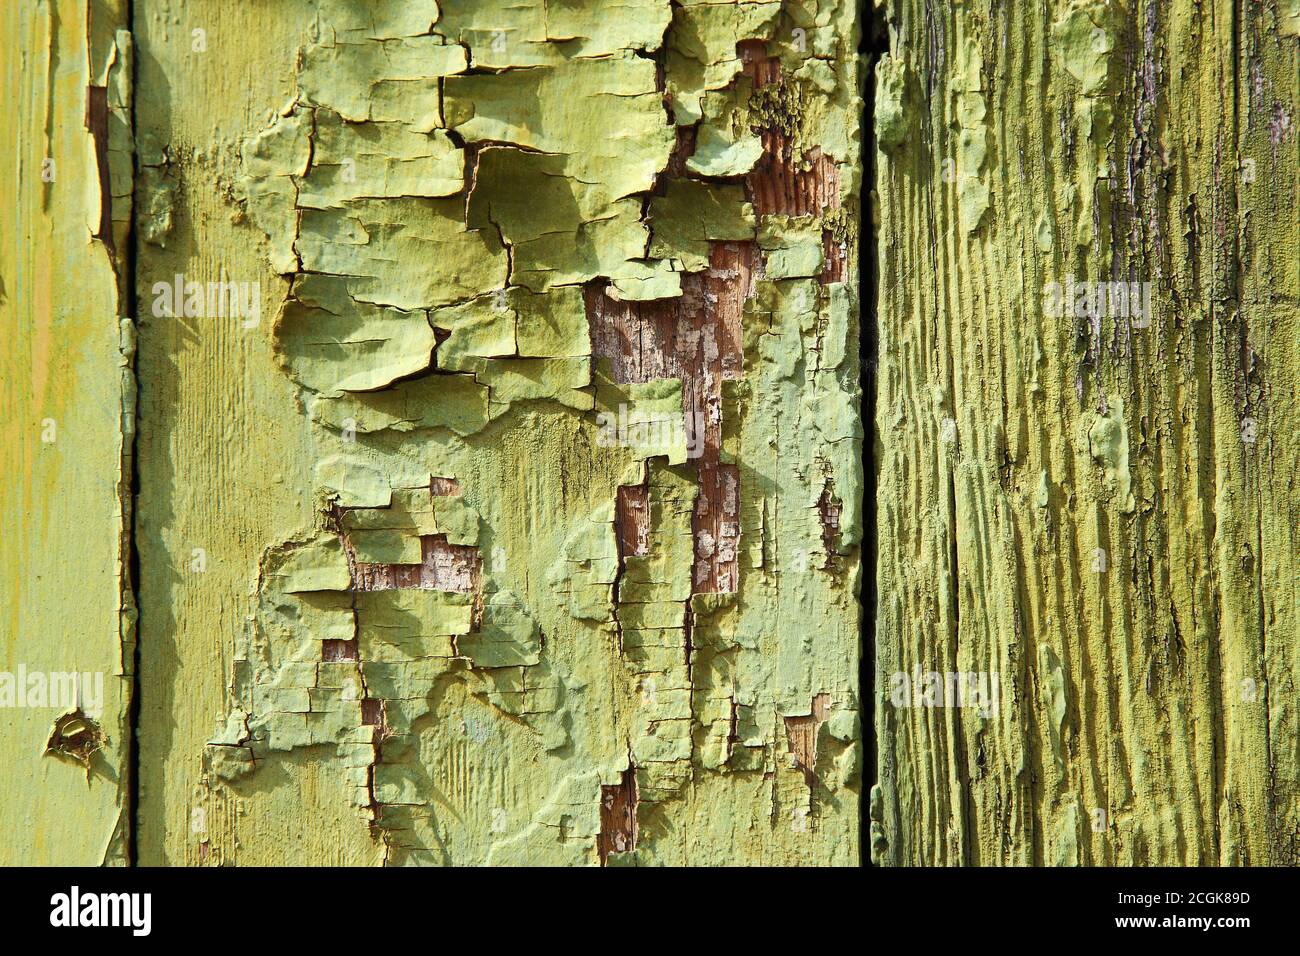 Lime green and chartreuse old peeling worn paint on clapboard wood cladding. Texture textured background. Stock Photo